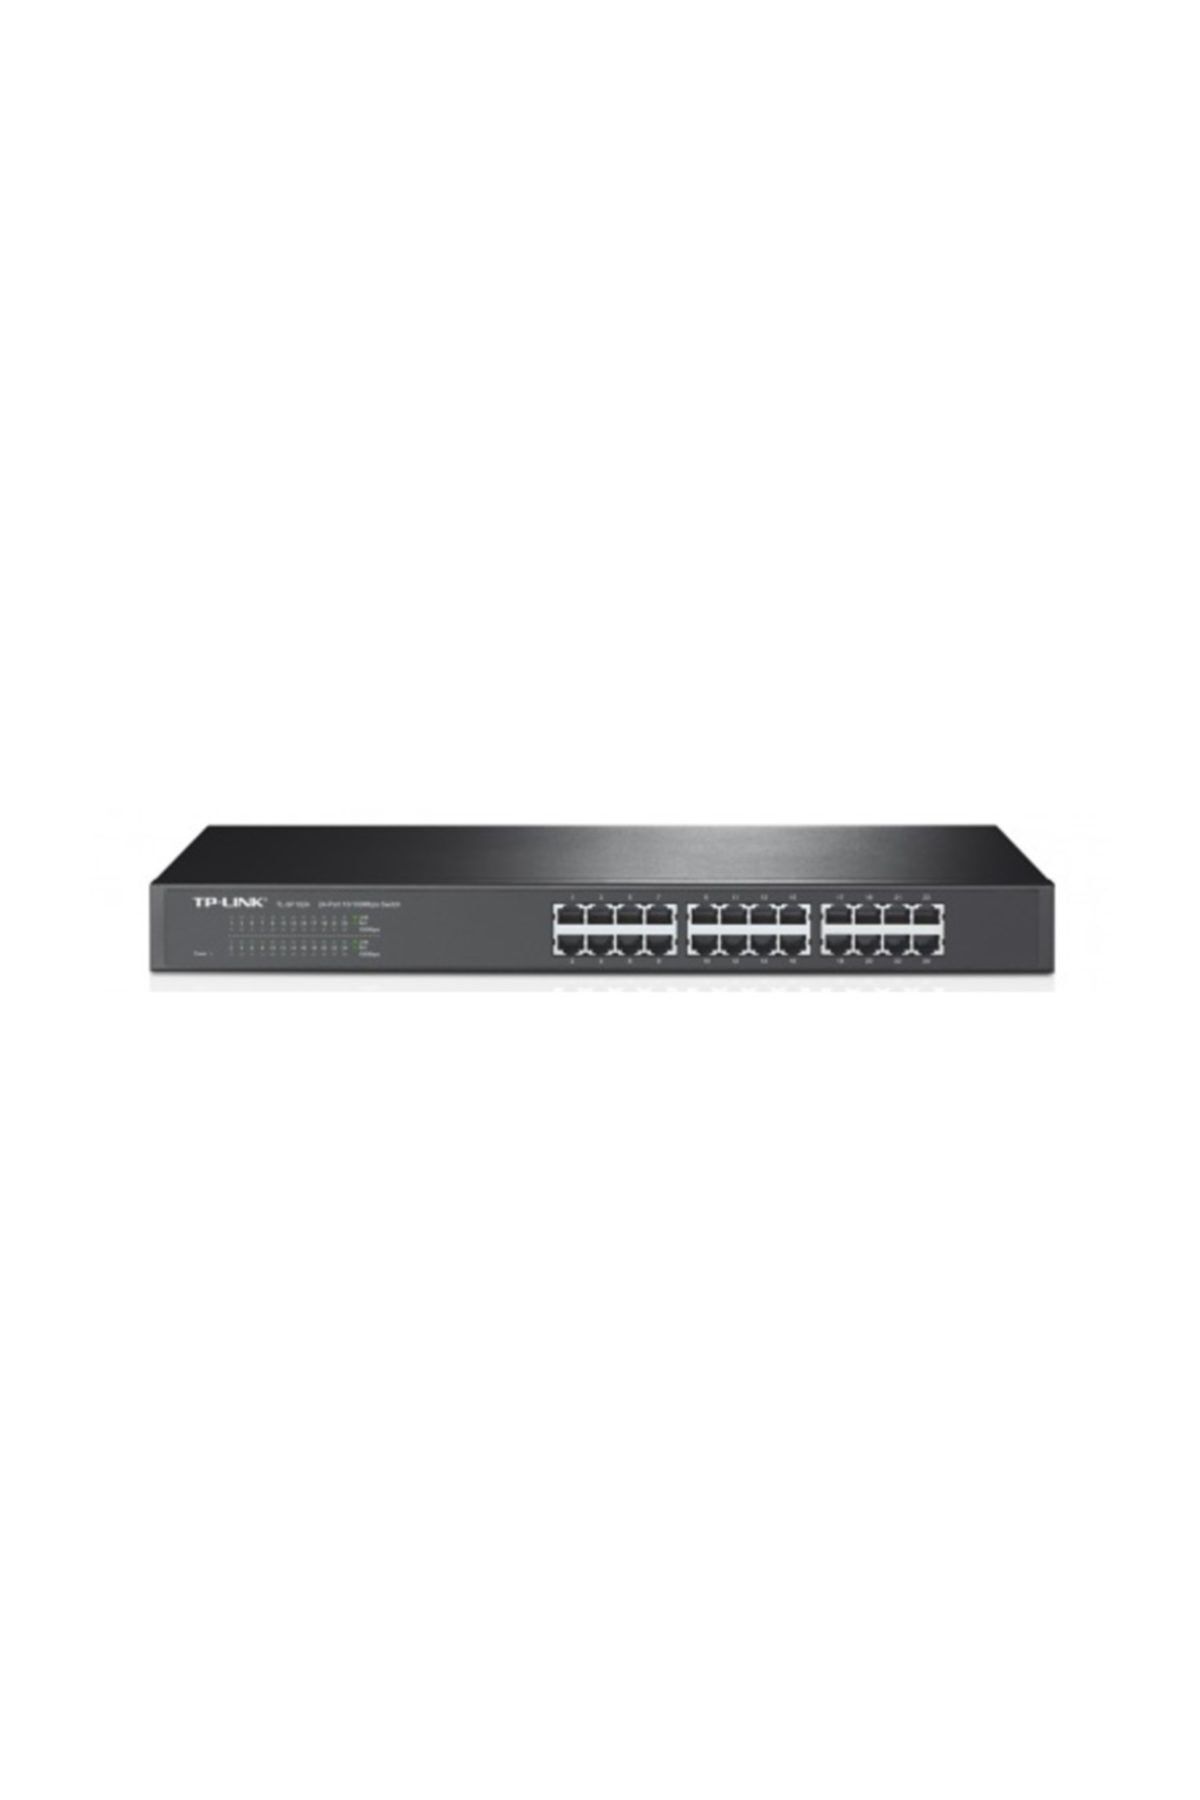 Tp-Link Sf1024  24 Port 10/100 Switch